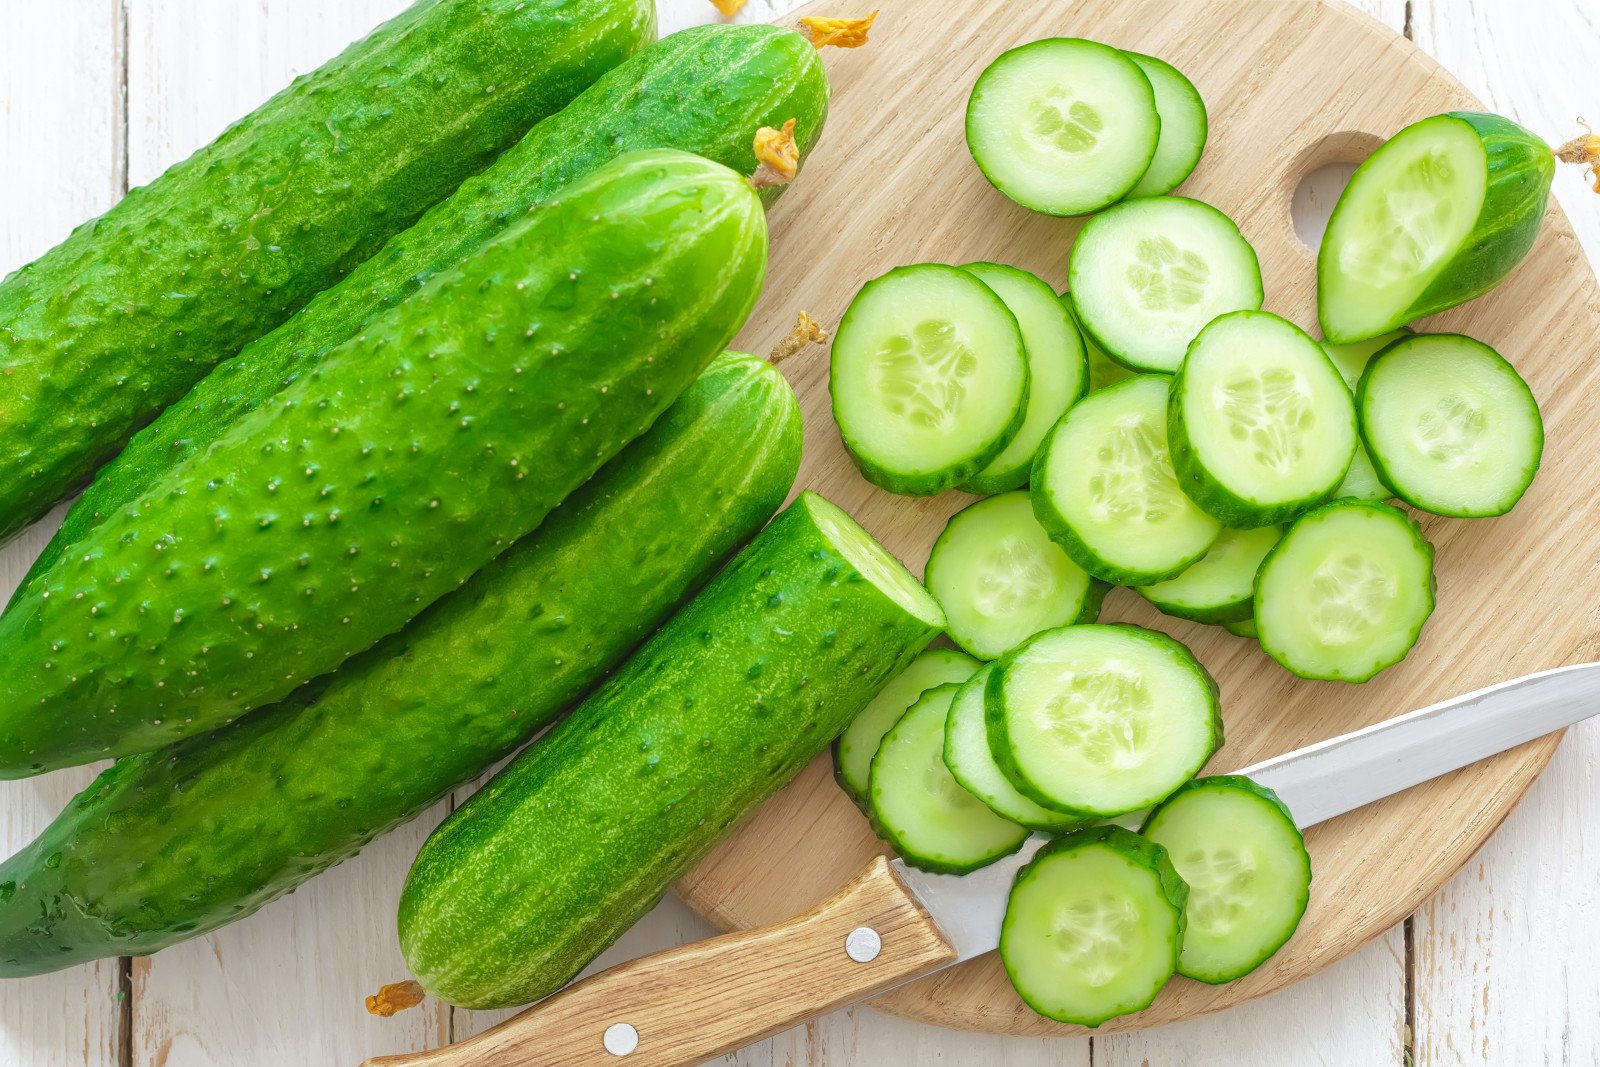 Several cucumbers on a cutting board with cucumber slices and a knife.